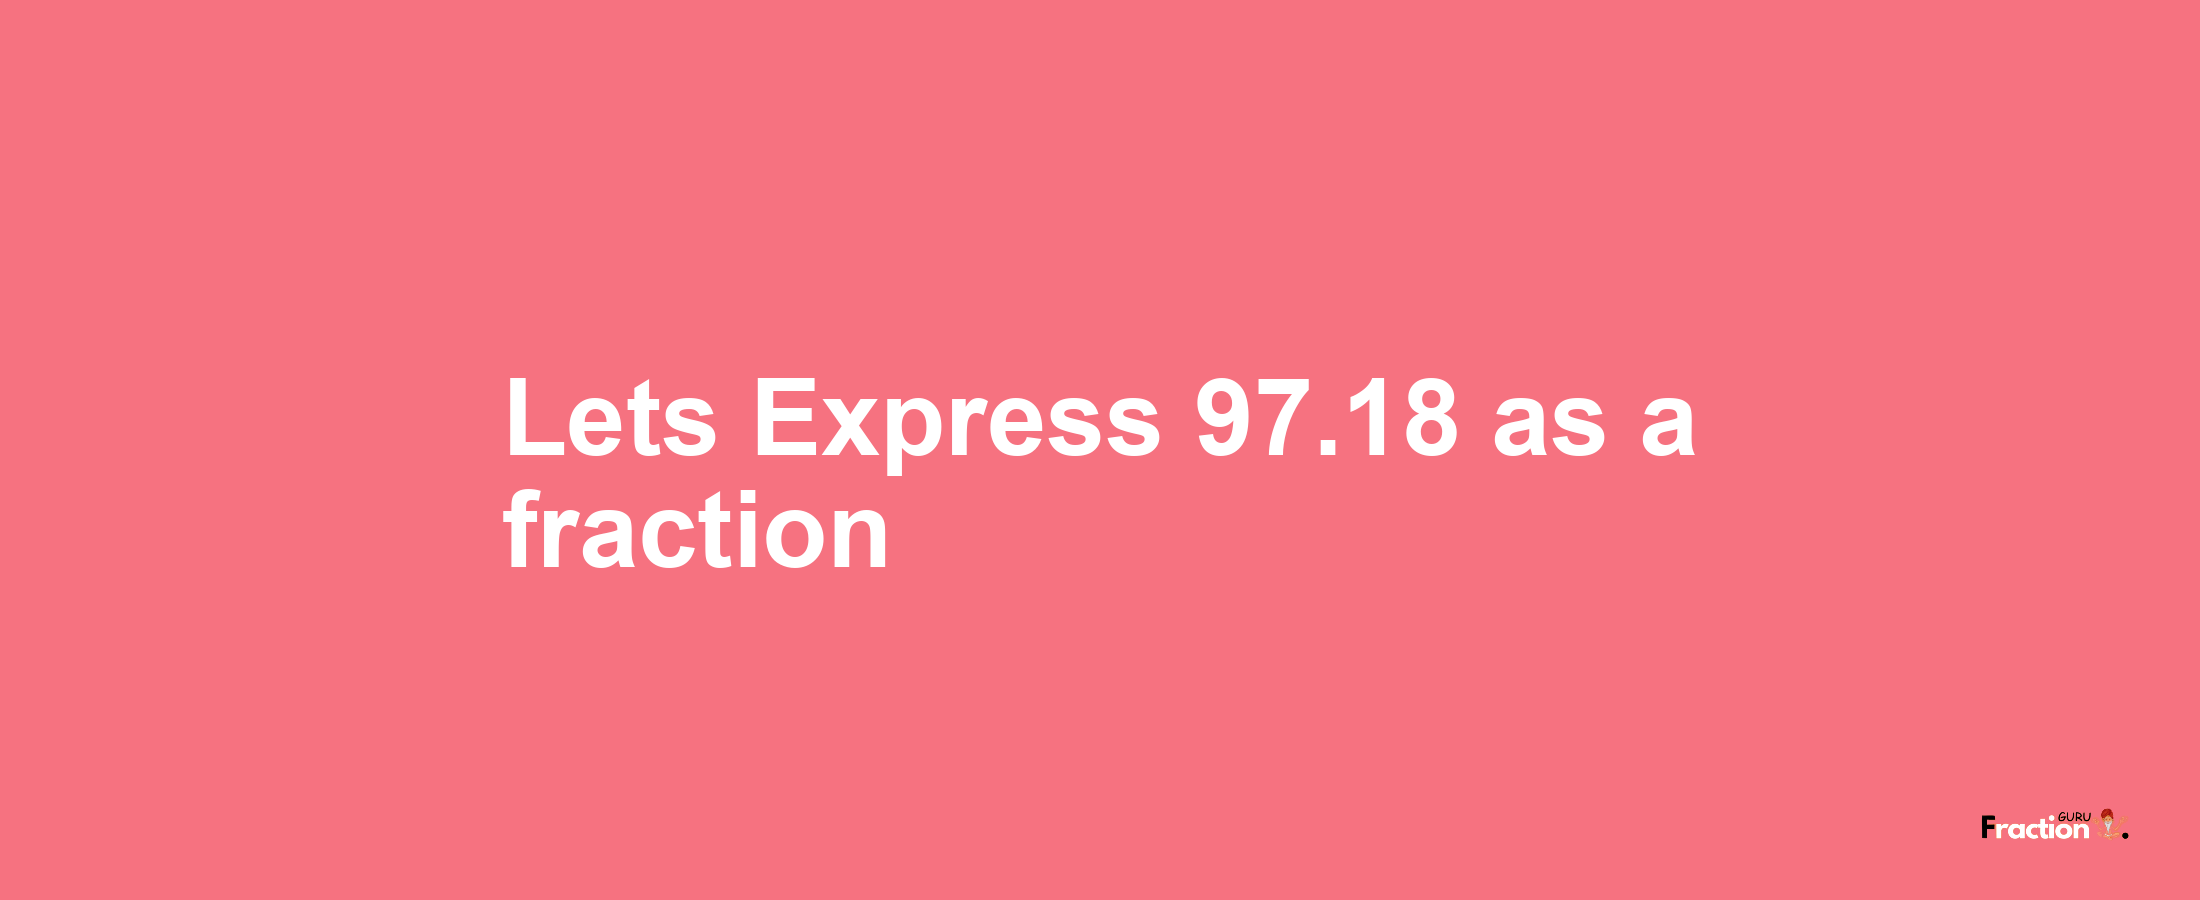 Lets Express 97.18 as afraction